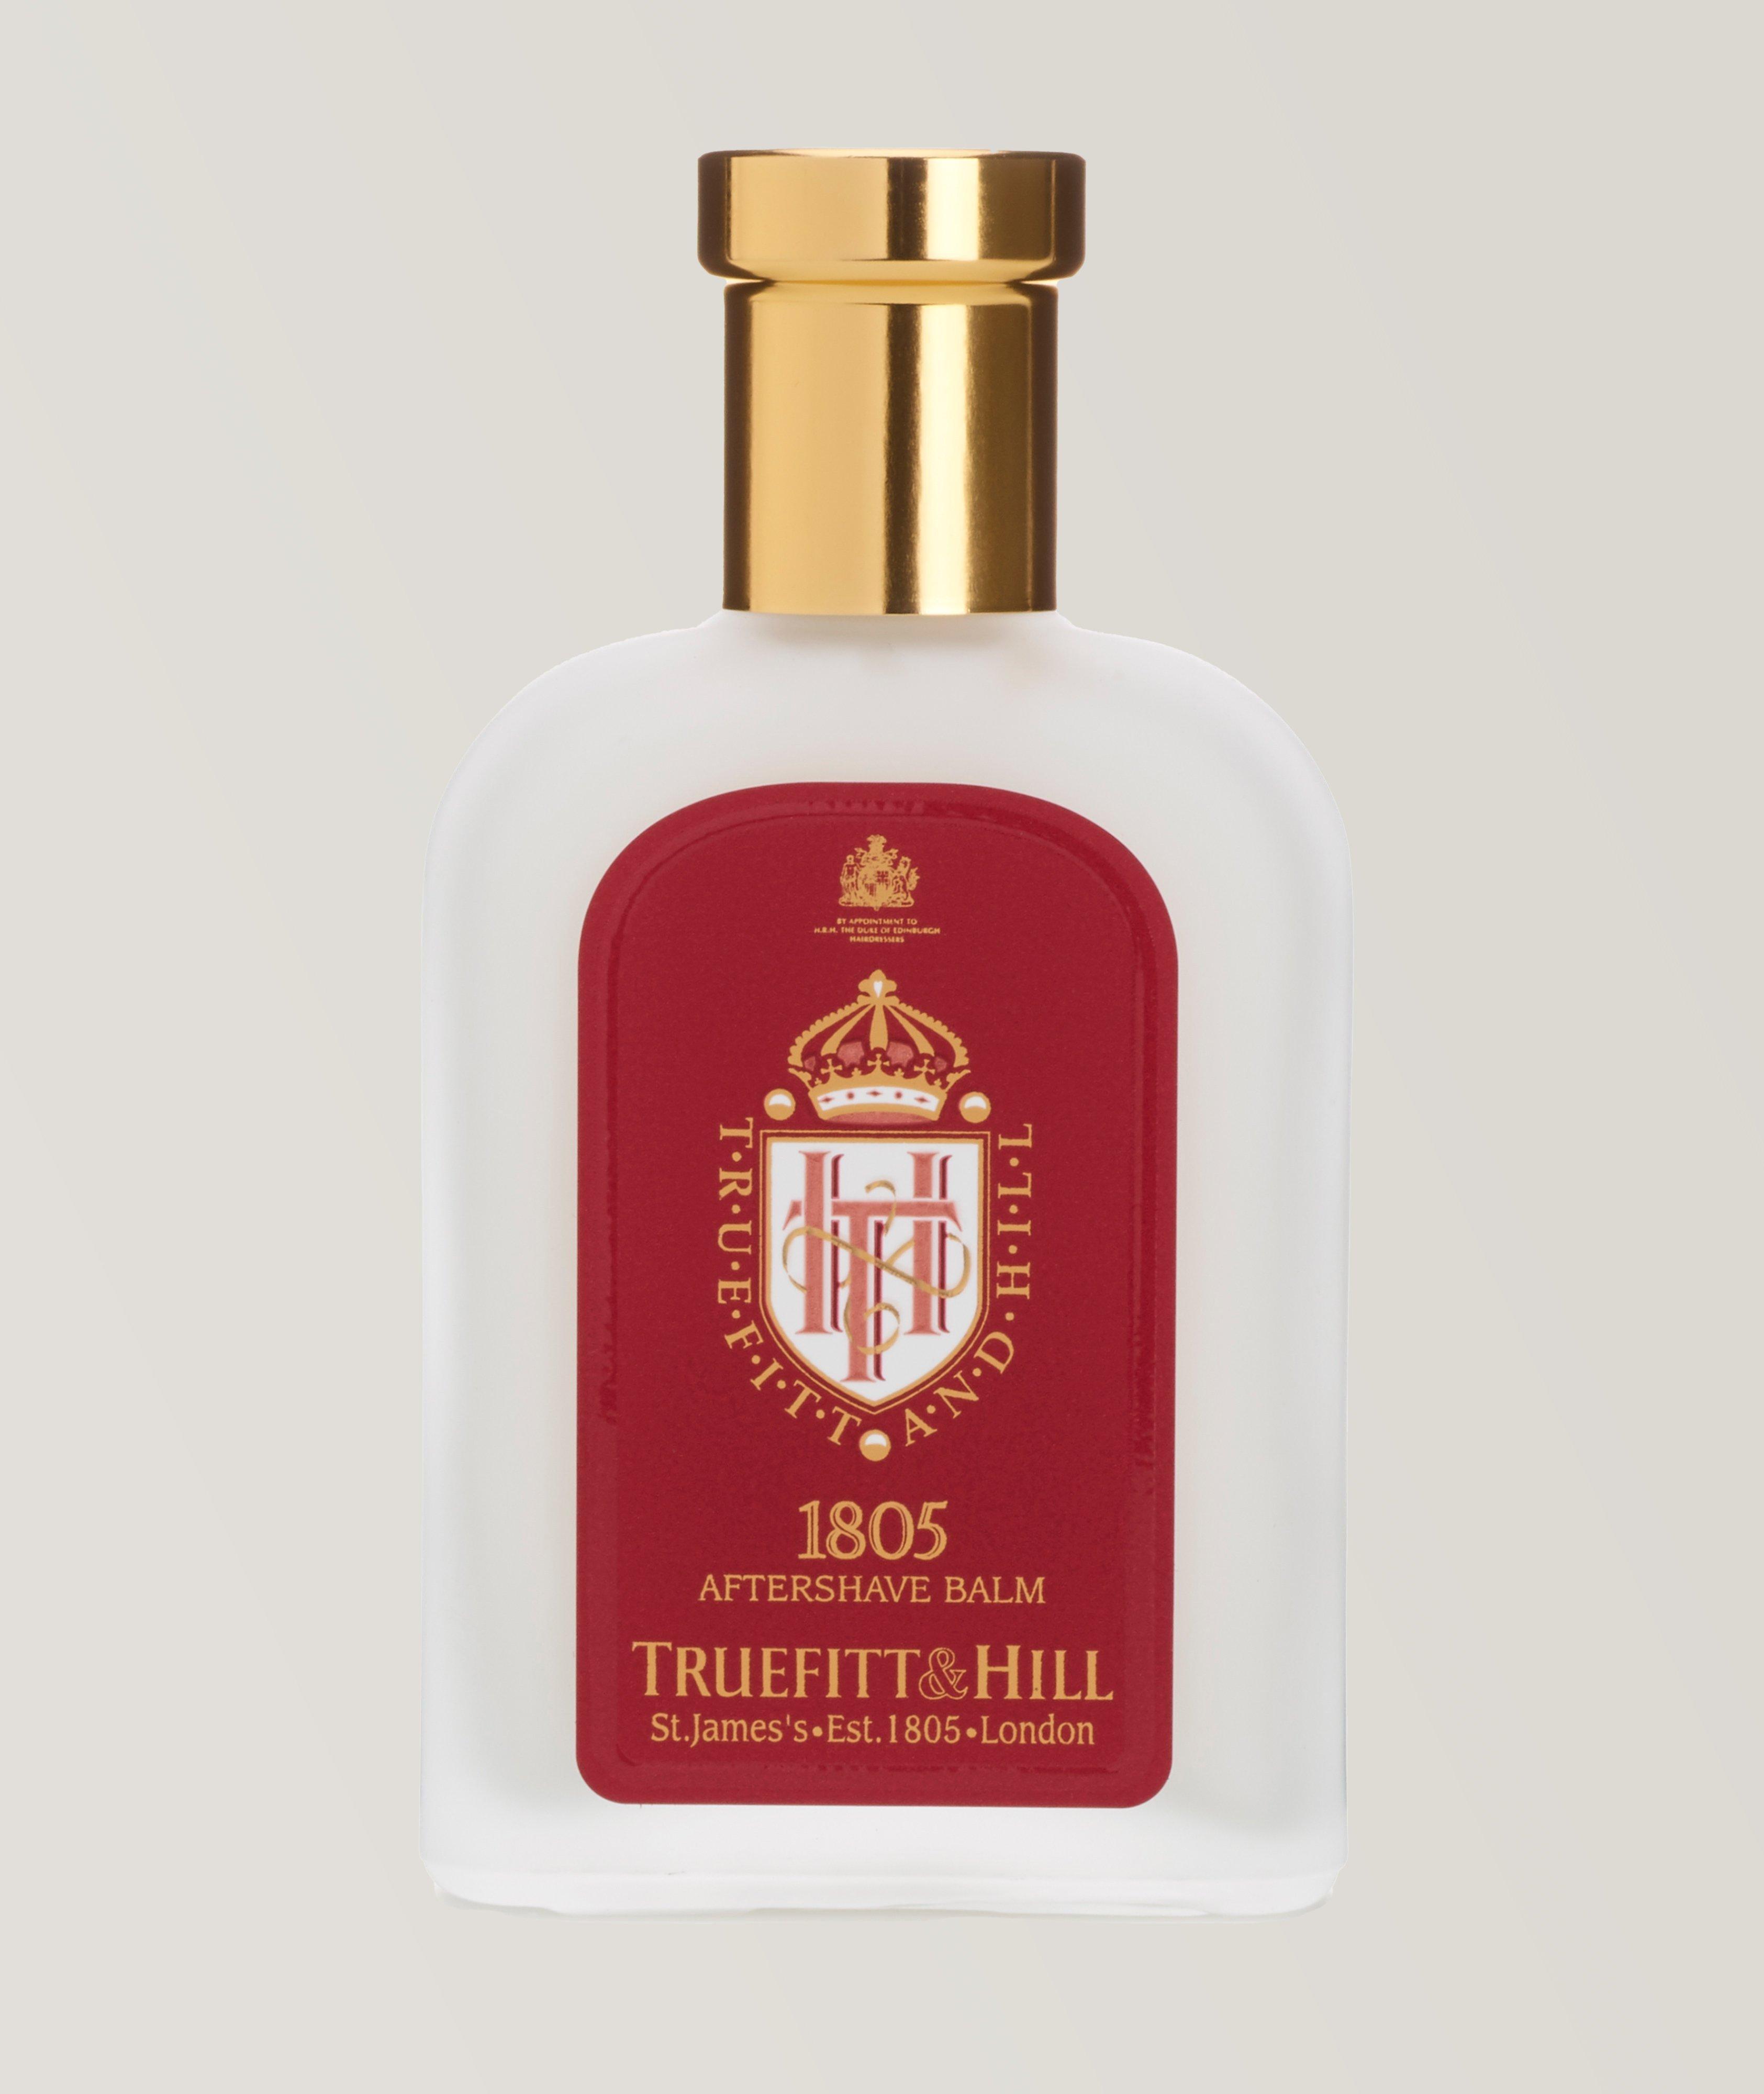 1805 Aftershave Balm